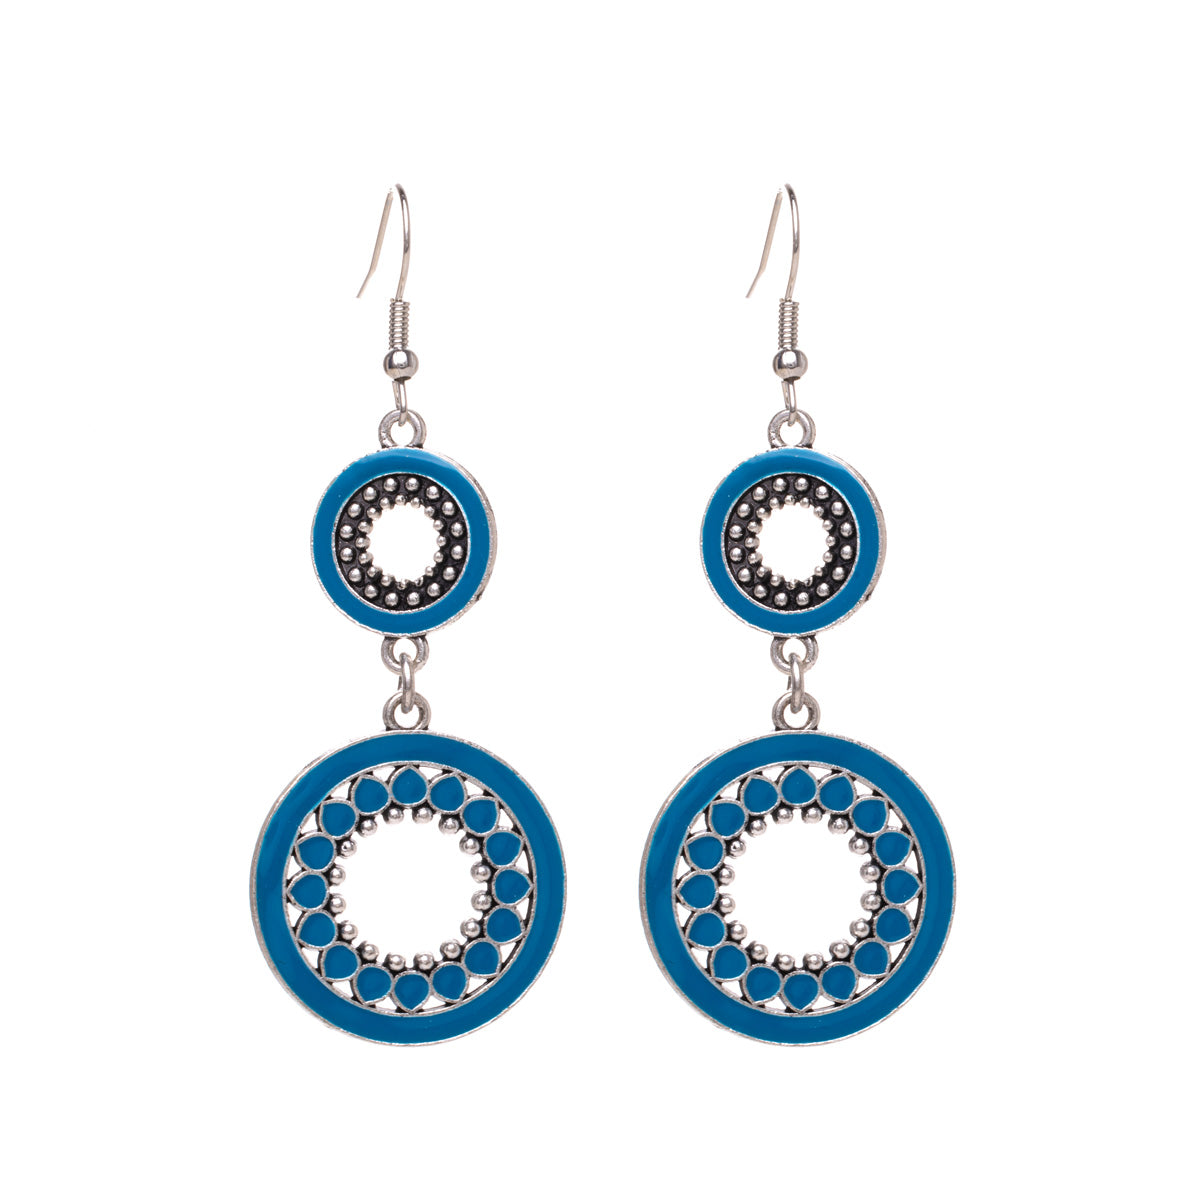 Coloured hanging renngas earrings